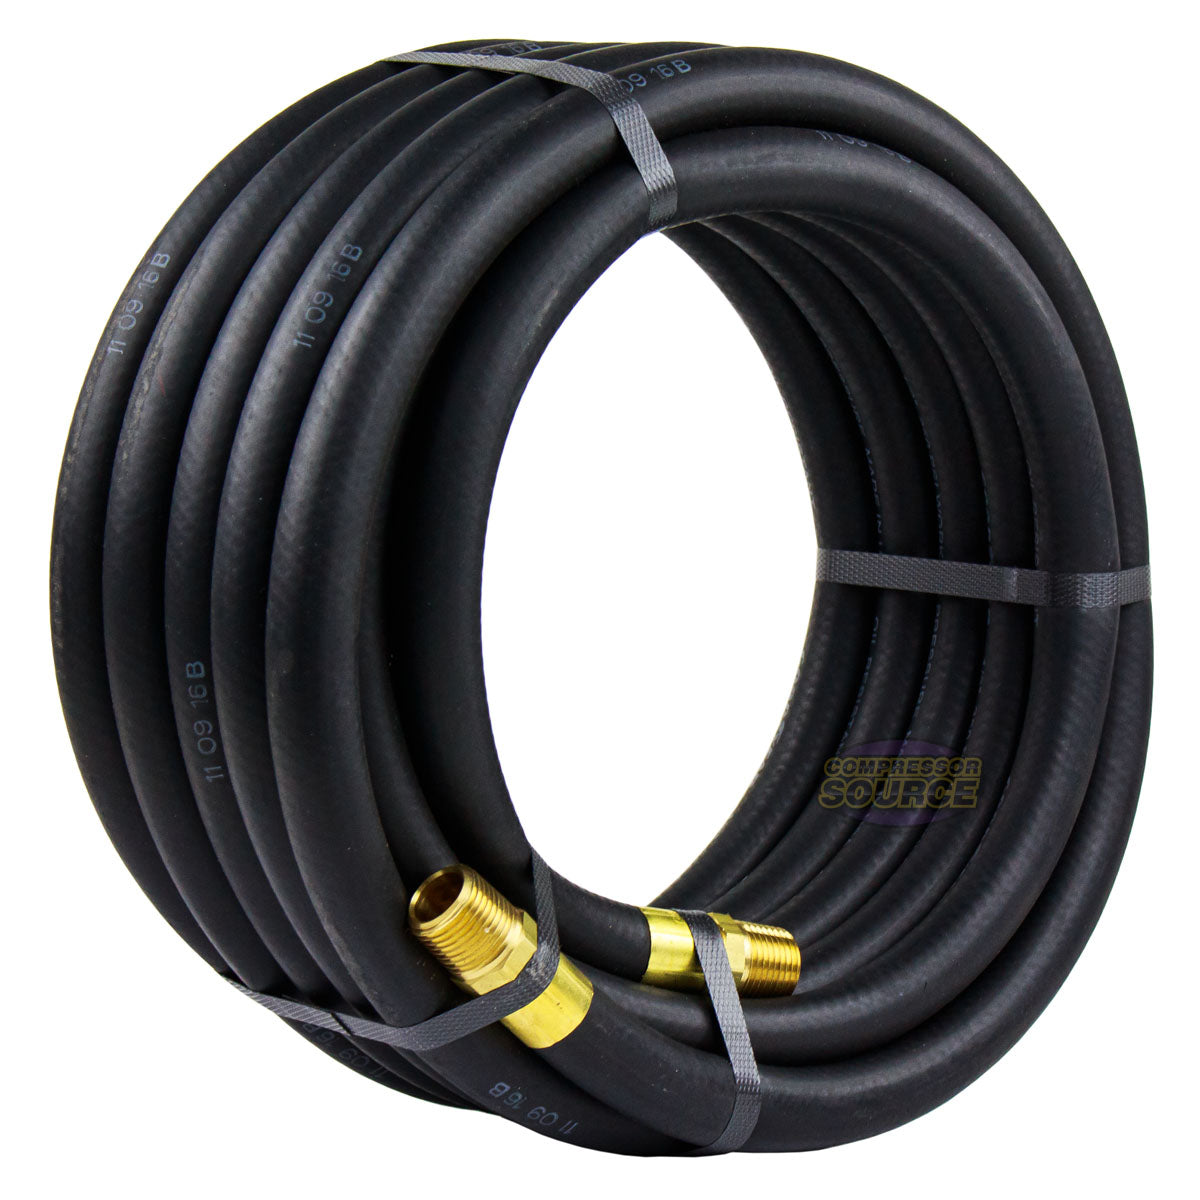 Goodyear 25' ft. x 1/2 in. Rubber Air Hose 250 PSI Air Compressor